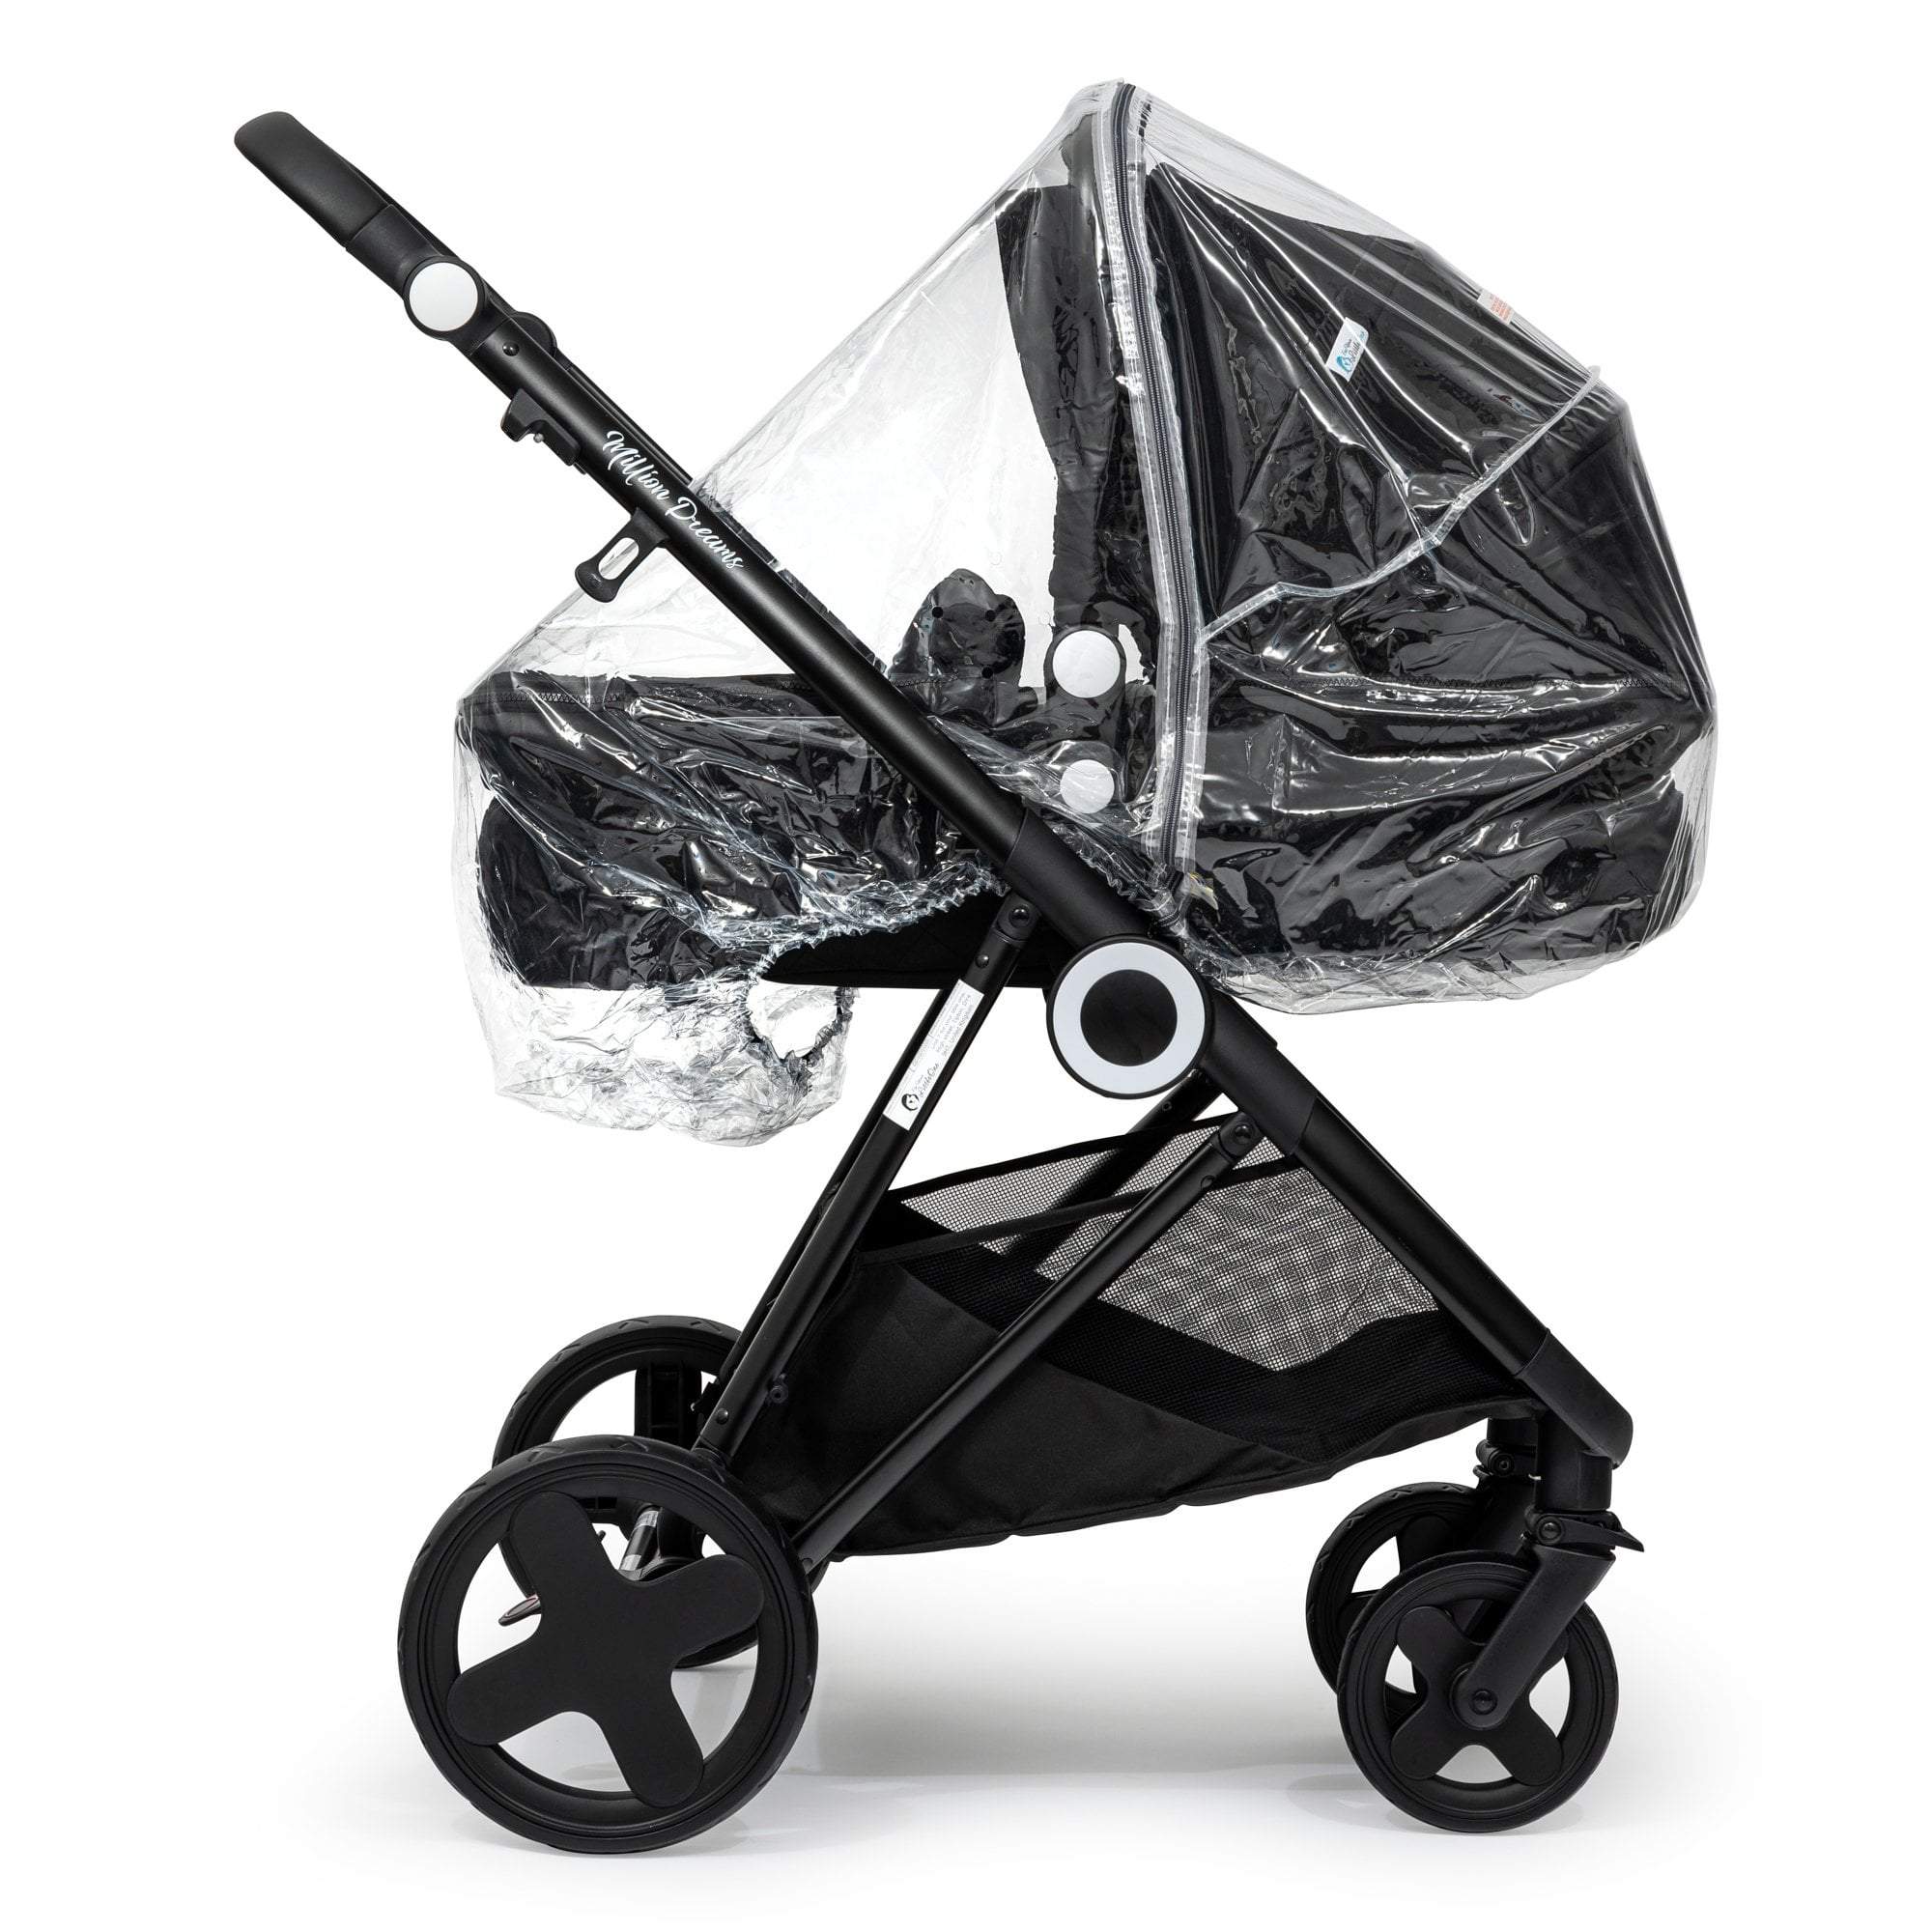 Carrycot Raincover Compatible With Nania - Fits All Models - For Your Little One